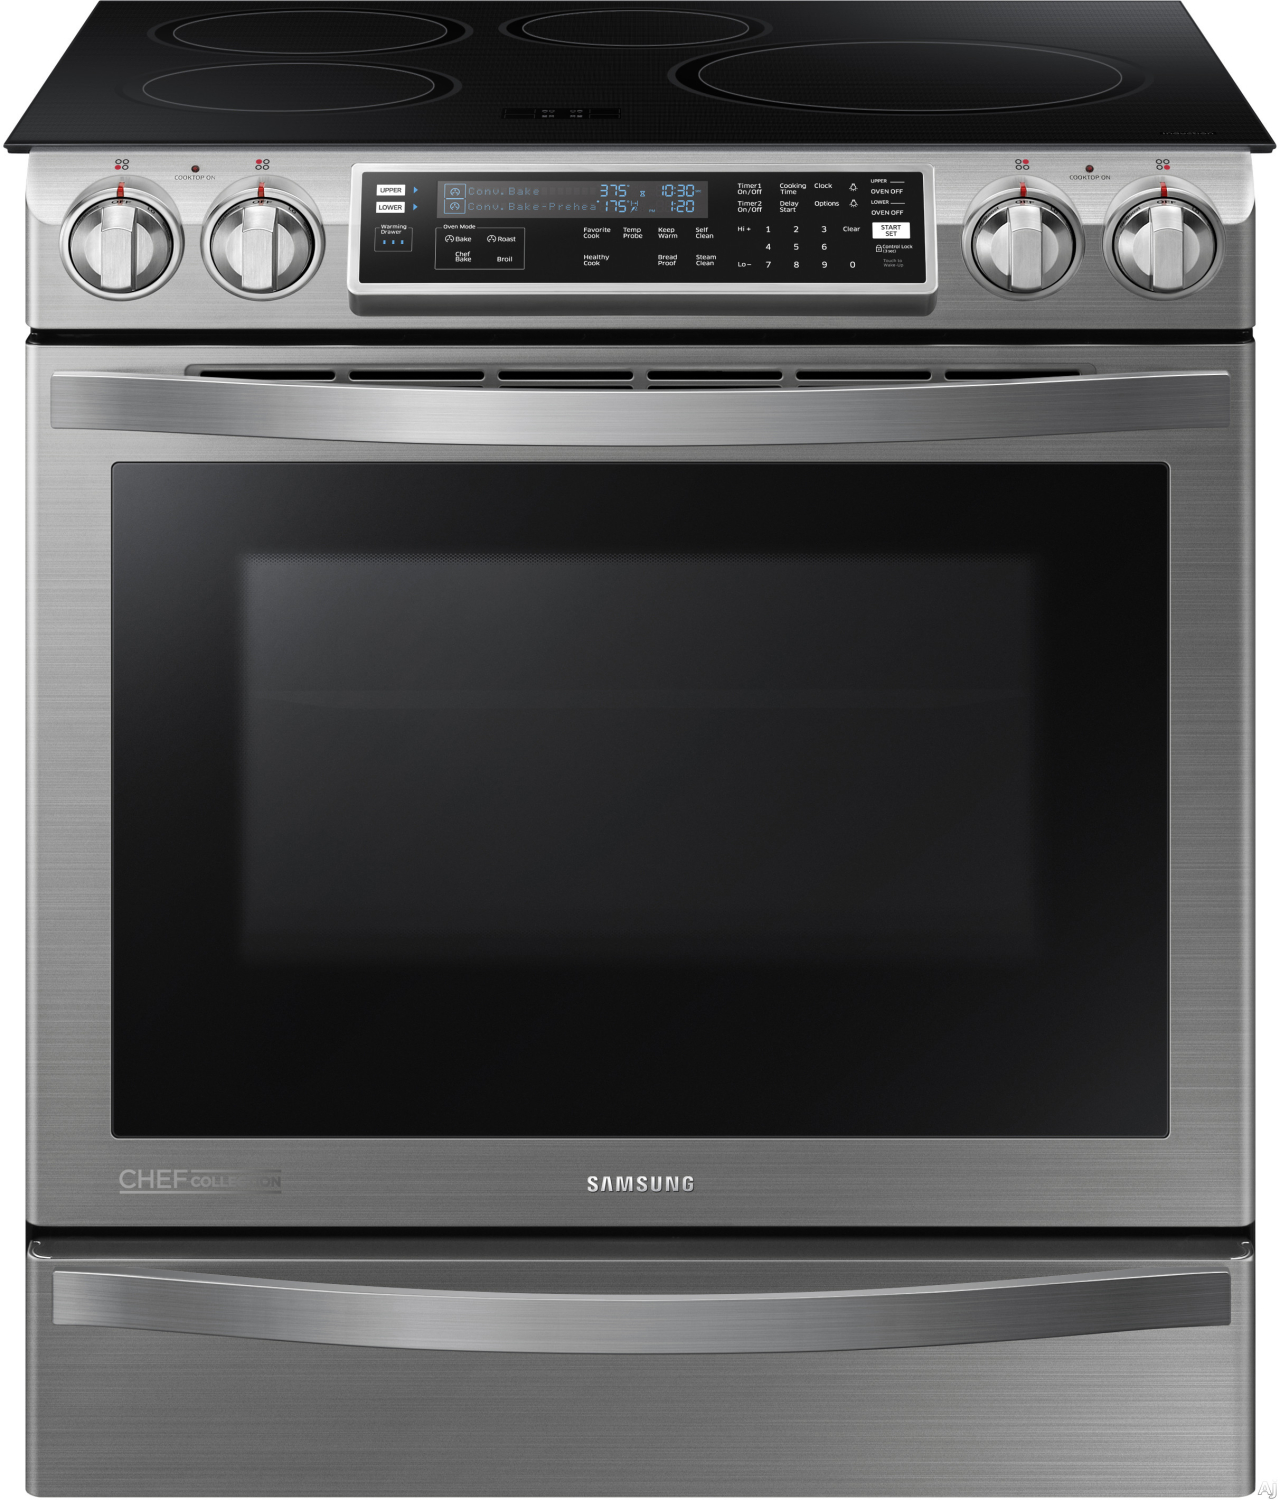 What are the advantages of using an induction range?